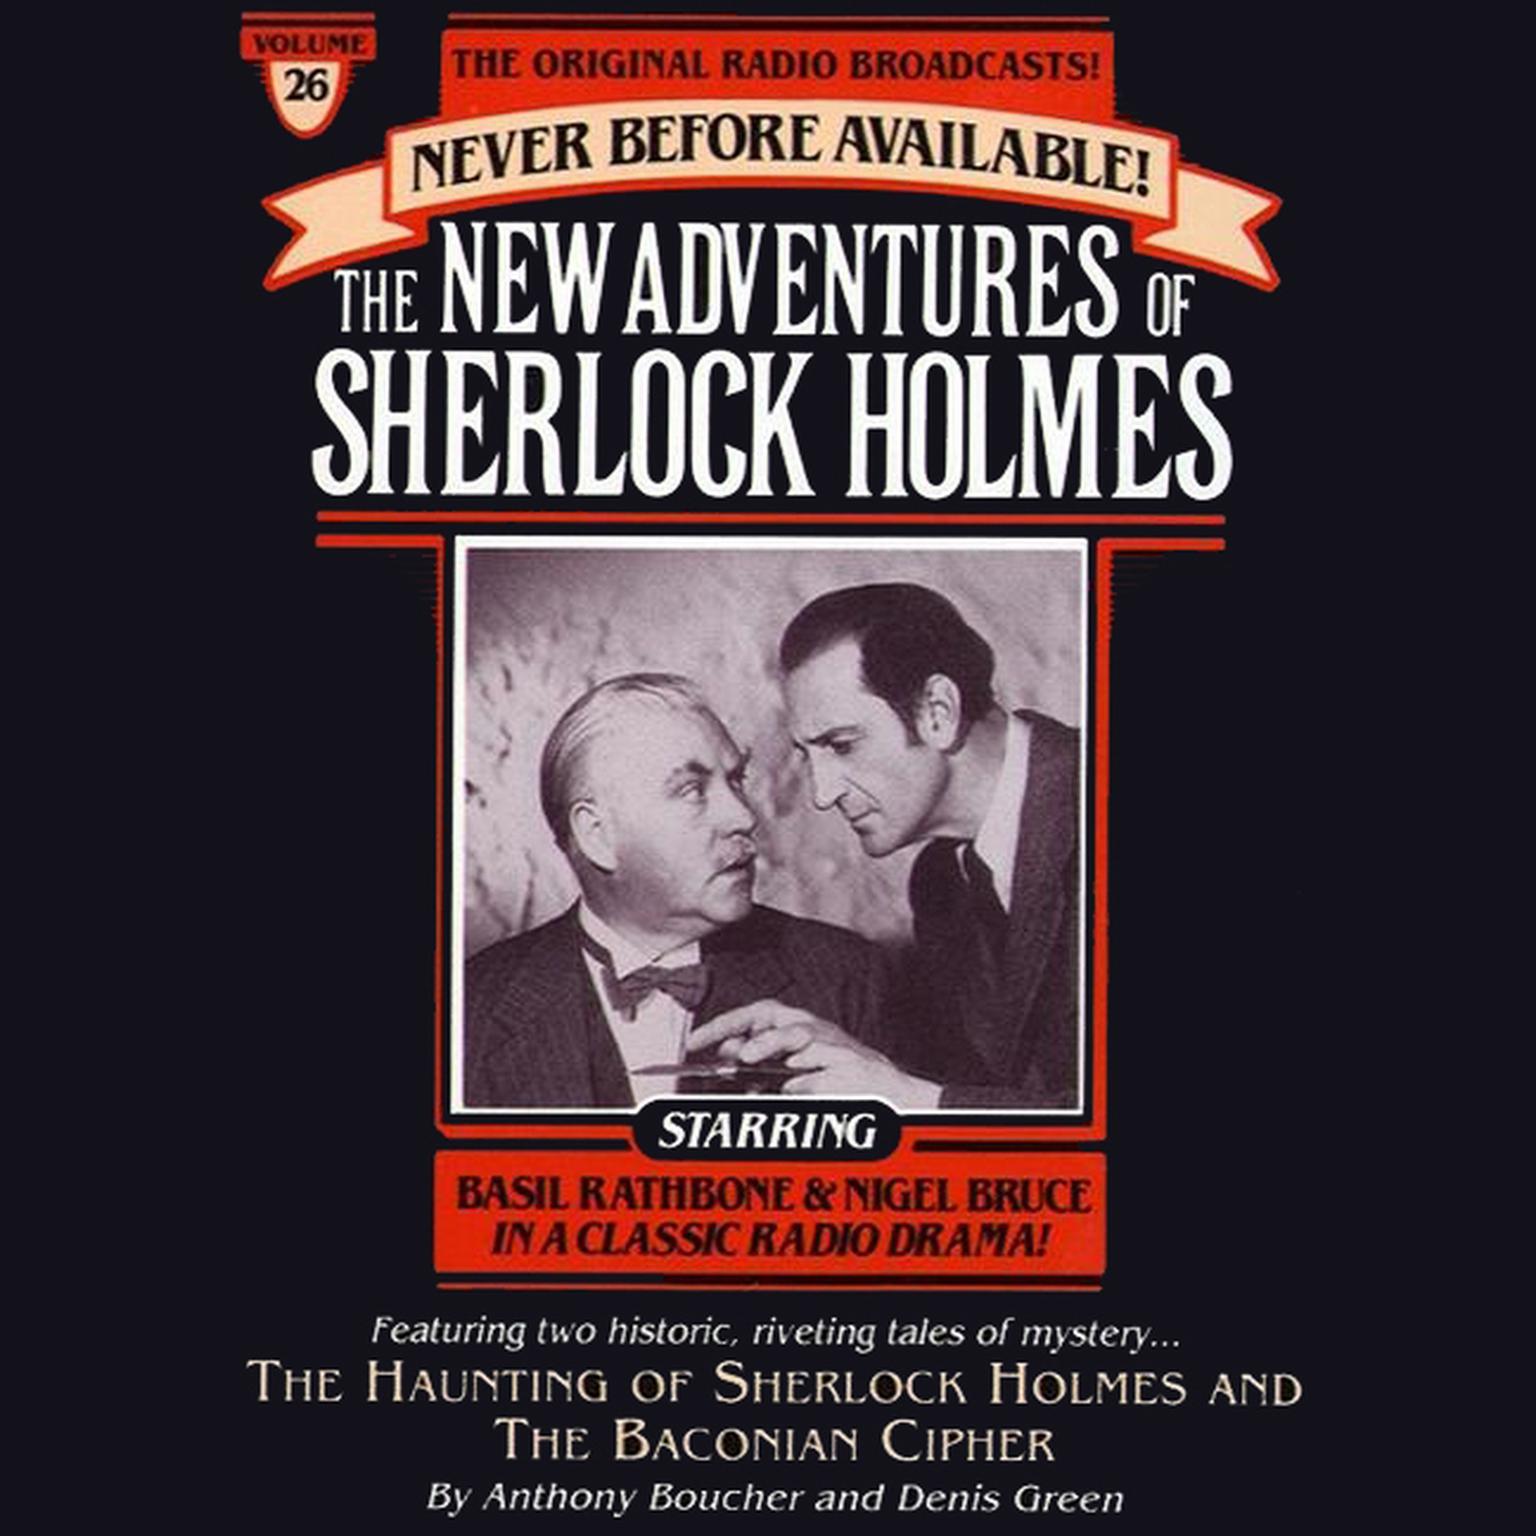 The Haunting of Sherlock Holmes and Baconian Cipher (Abridged): The New Adventures of Sherlock Holmes, Episode 26 Audiobook, by Anthony Boucher